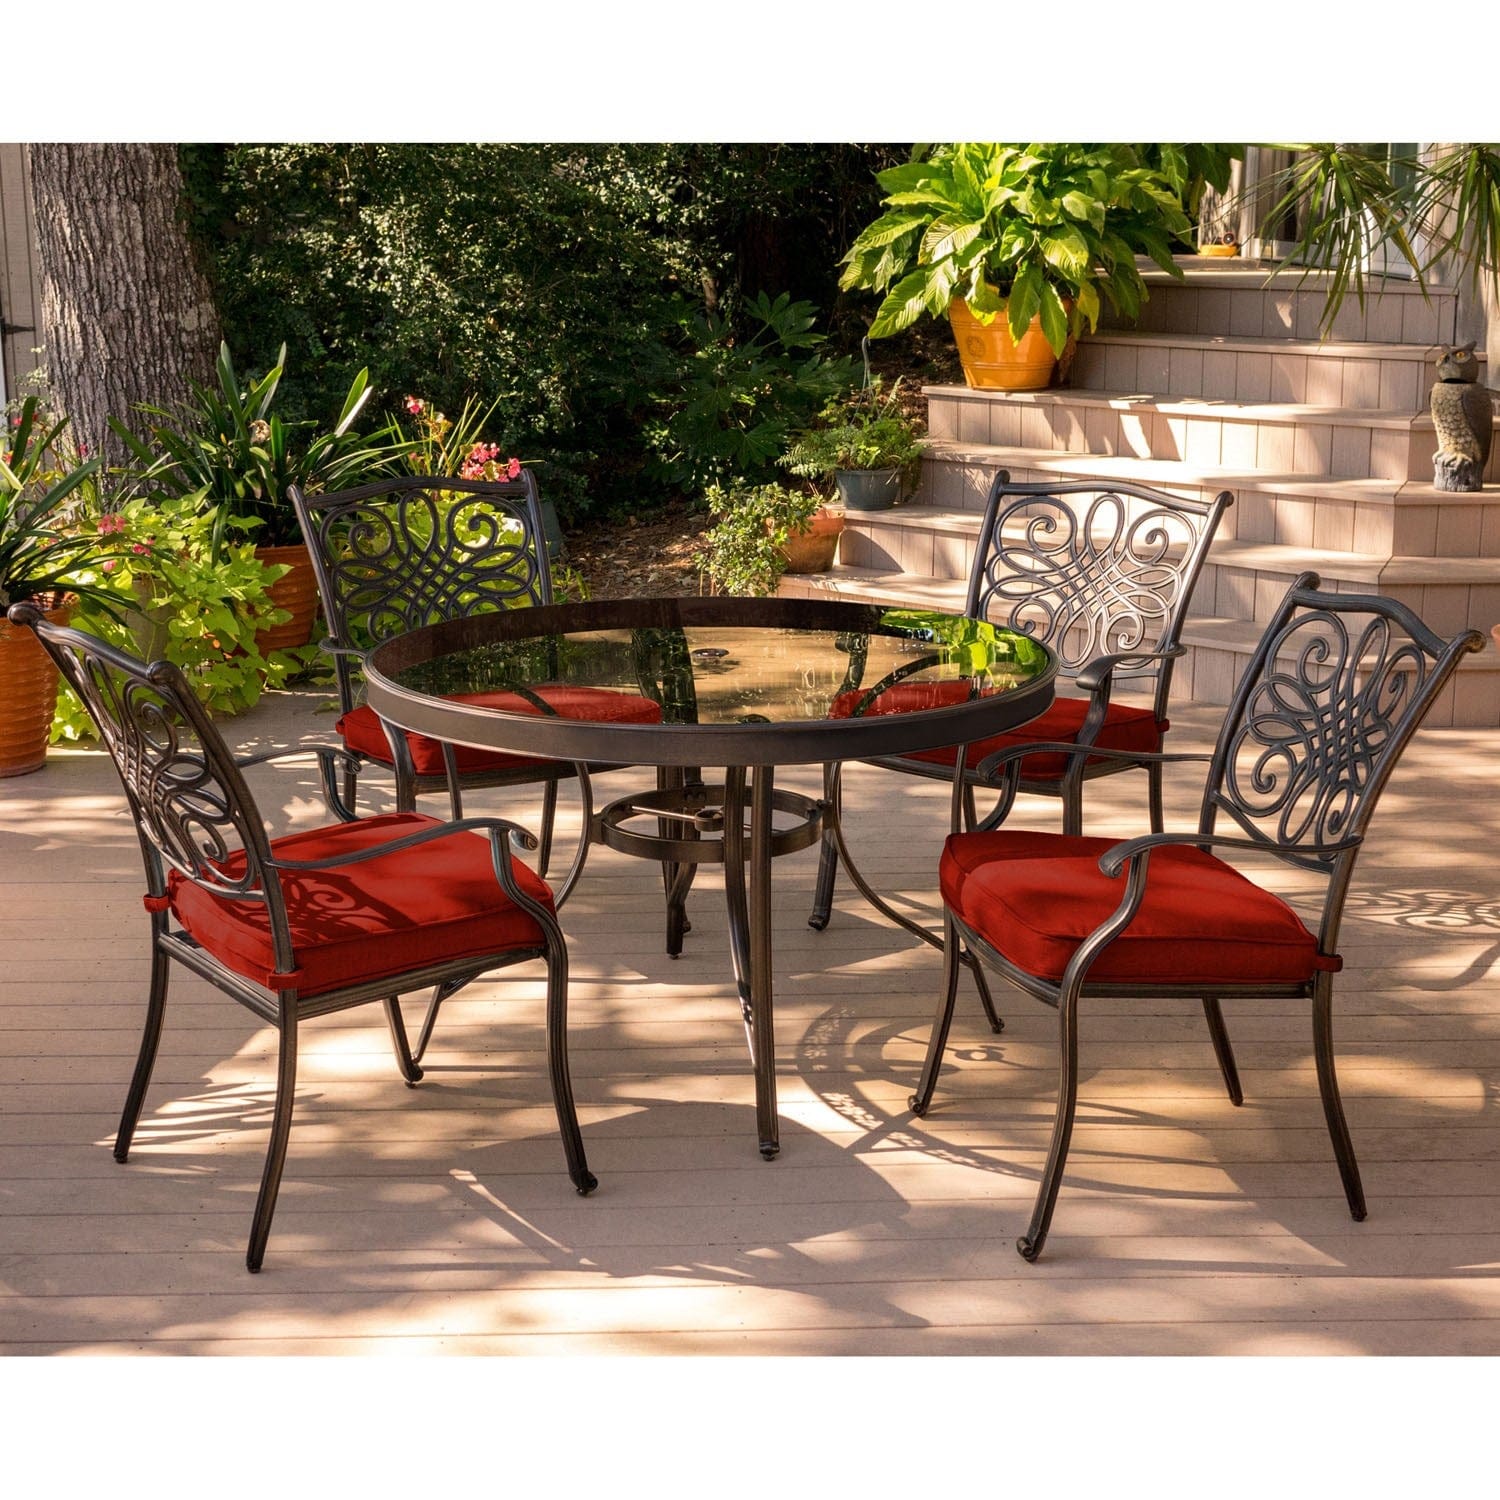 Hanover Outdoor Dining Set Hanover Traditions 5-Piece Aluminum Frame Dining Set in Red with 48 In. Glass-top Table | TRADDN5PCG-RED